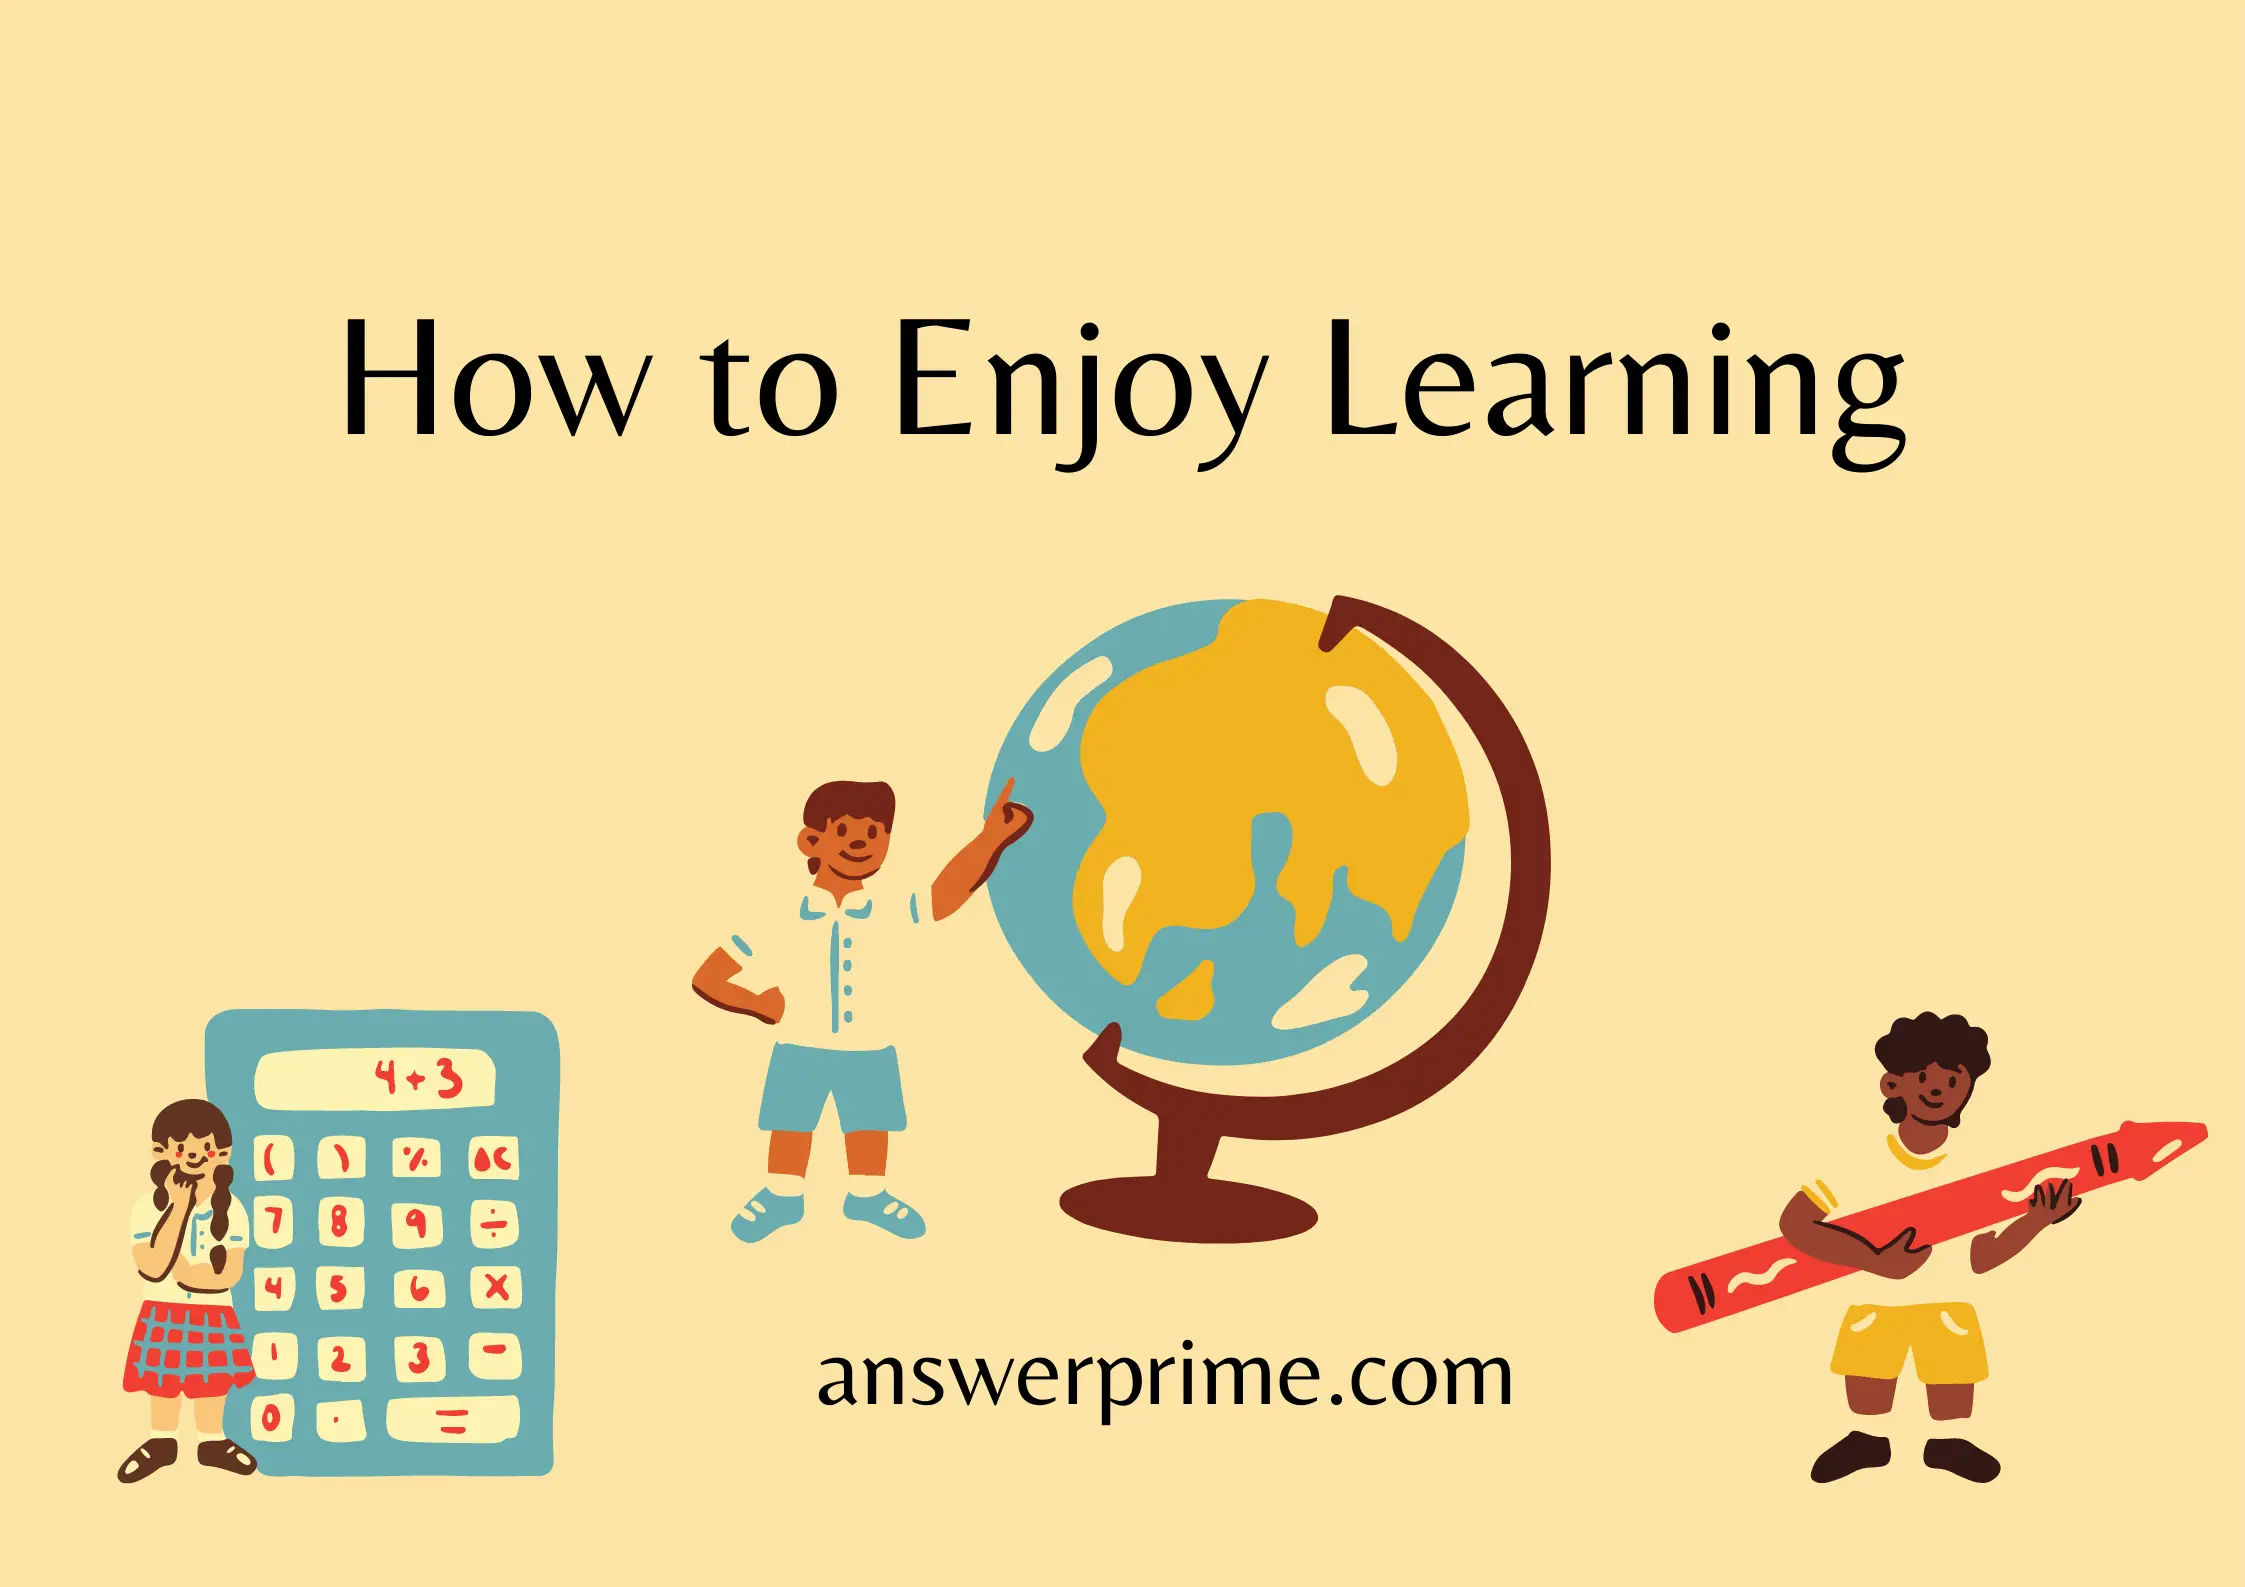 How to Enjoy Learning